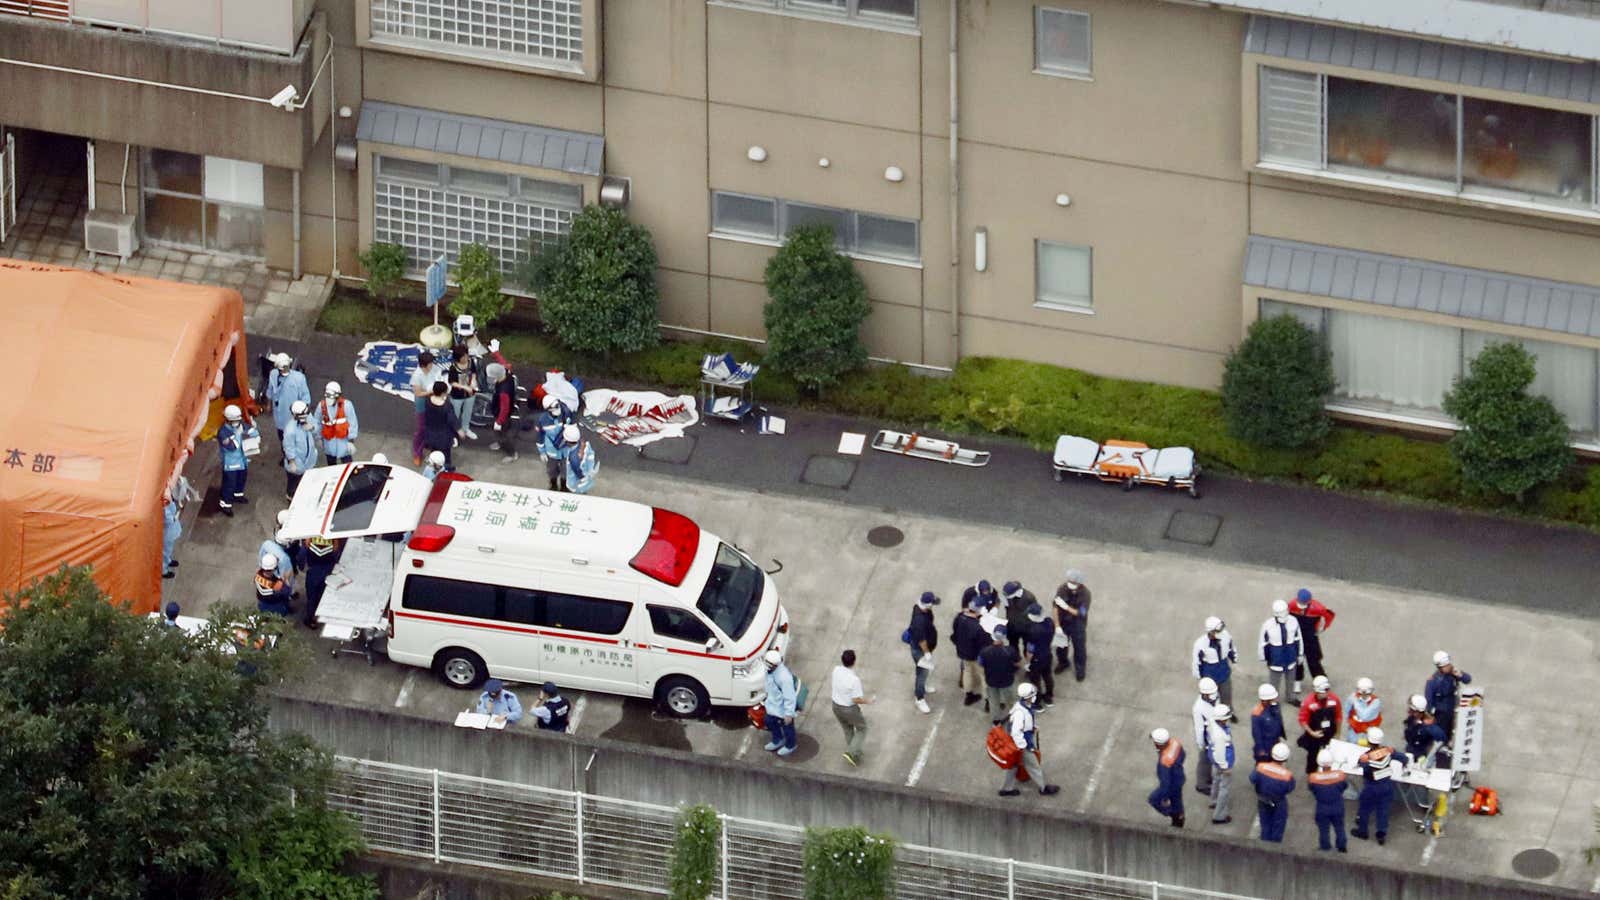 Outside the facilities where the crime took place in Sagamihara.